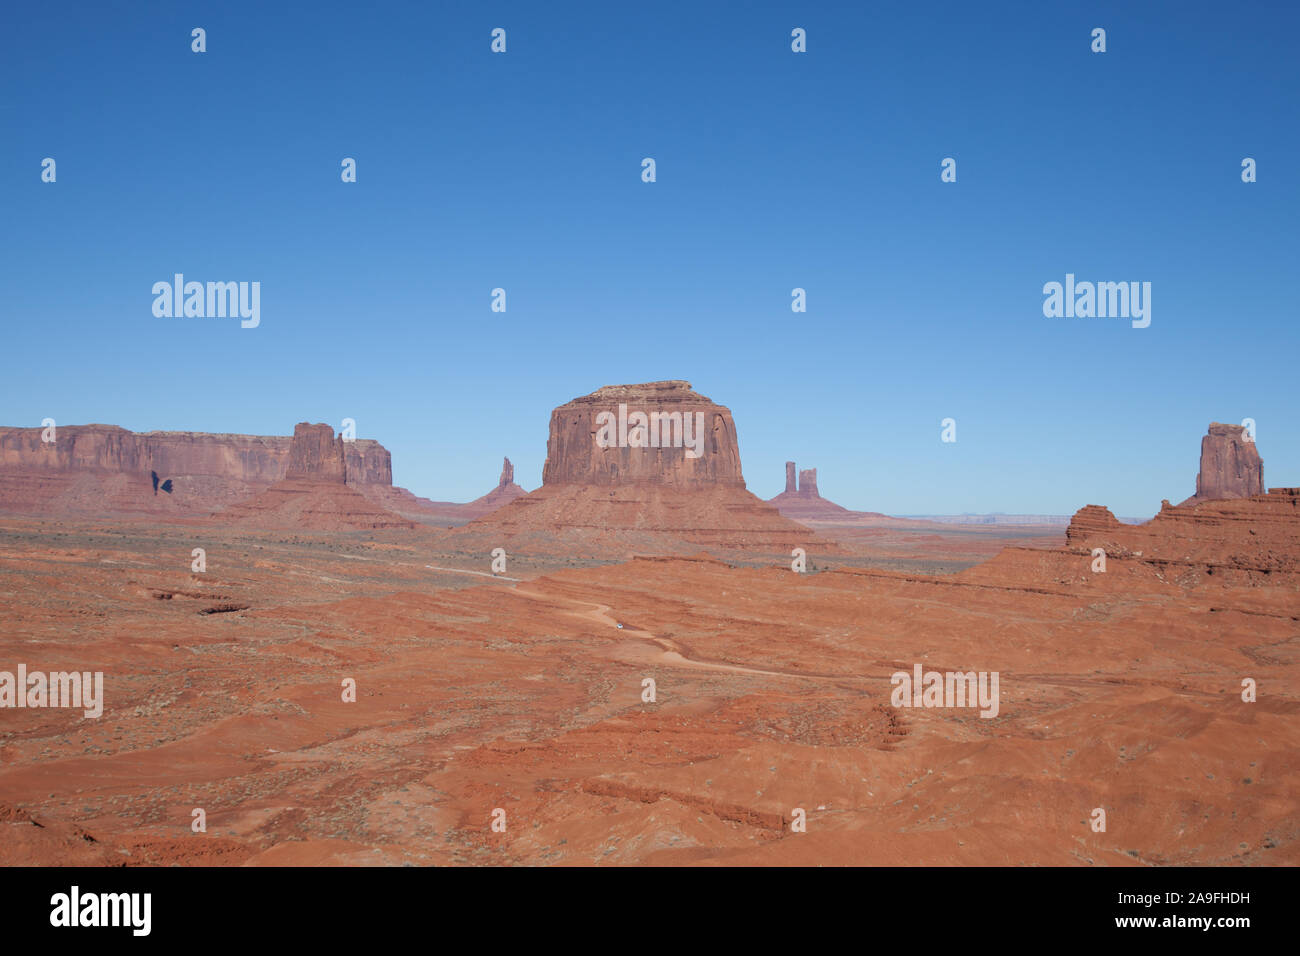 The famous rock formations of Monument Valley, Utah Stock Photo